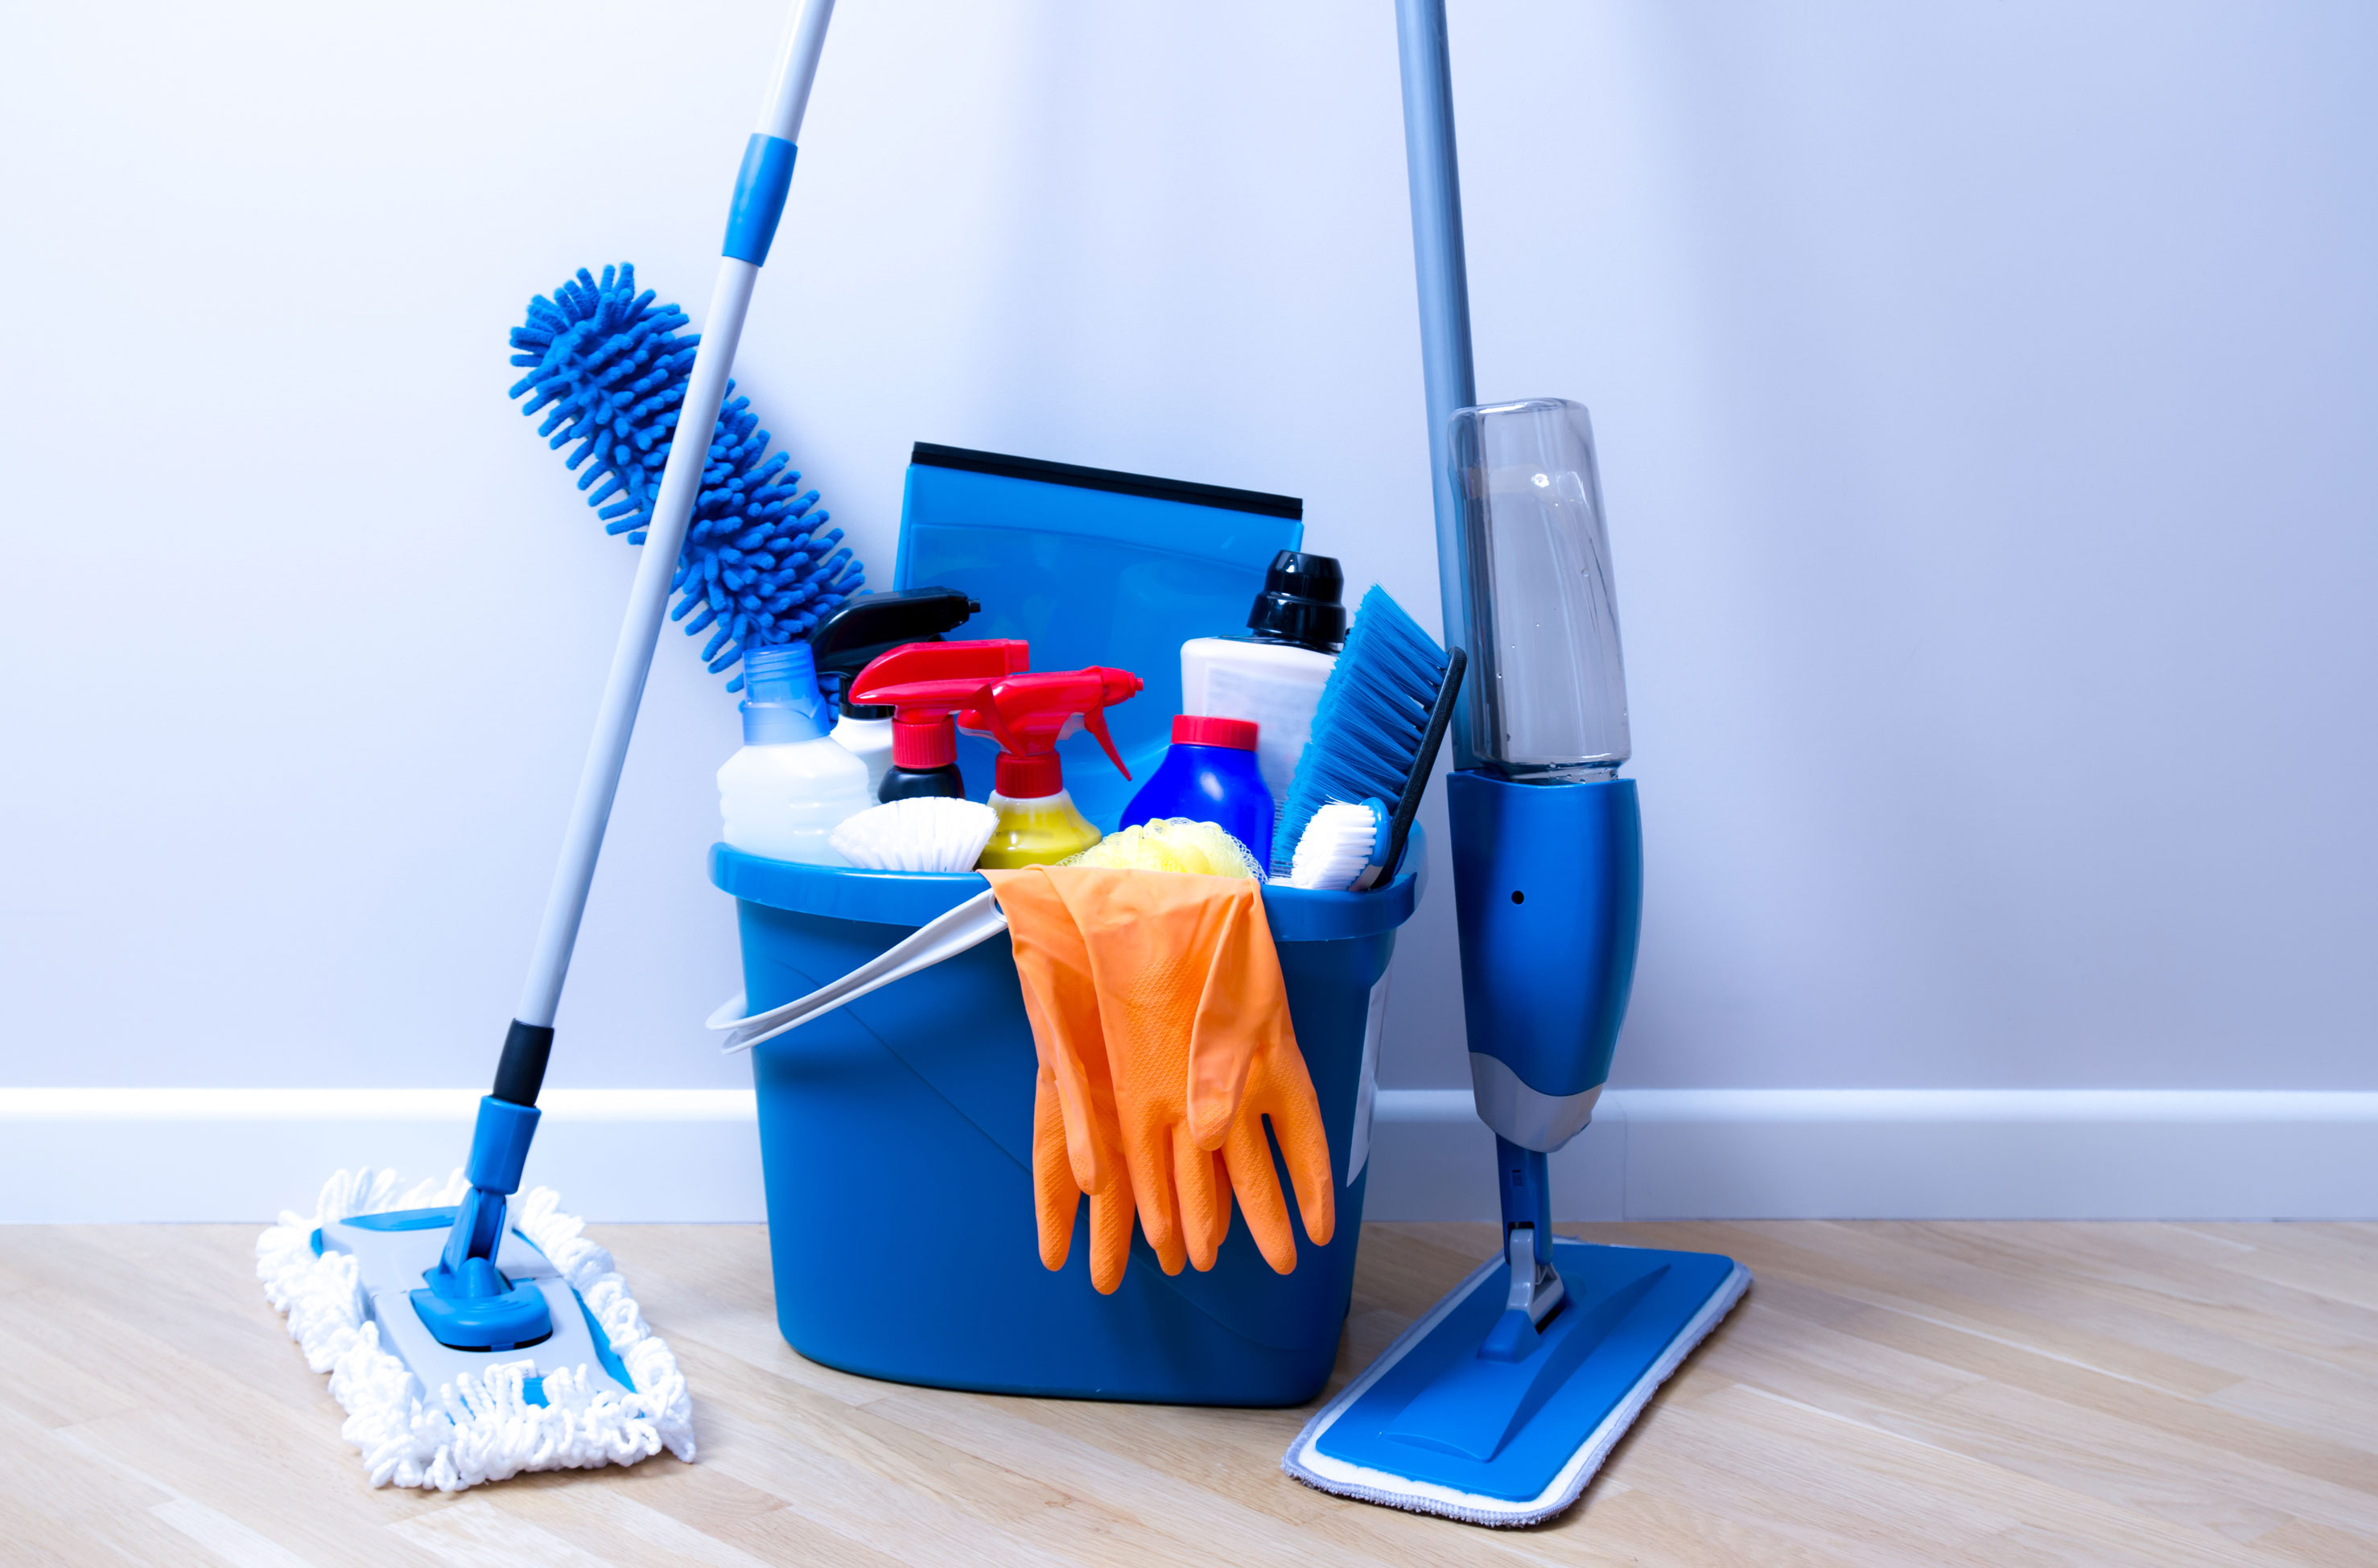 Wet Mopping vs. Dry Mopping: What's the Difference?